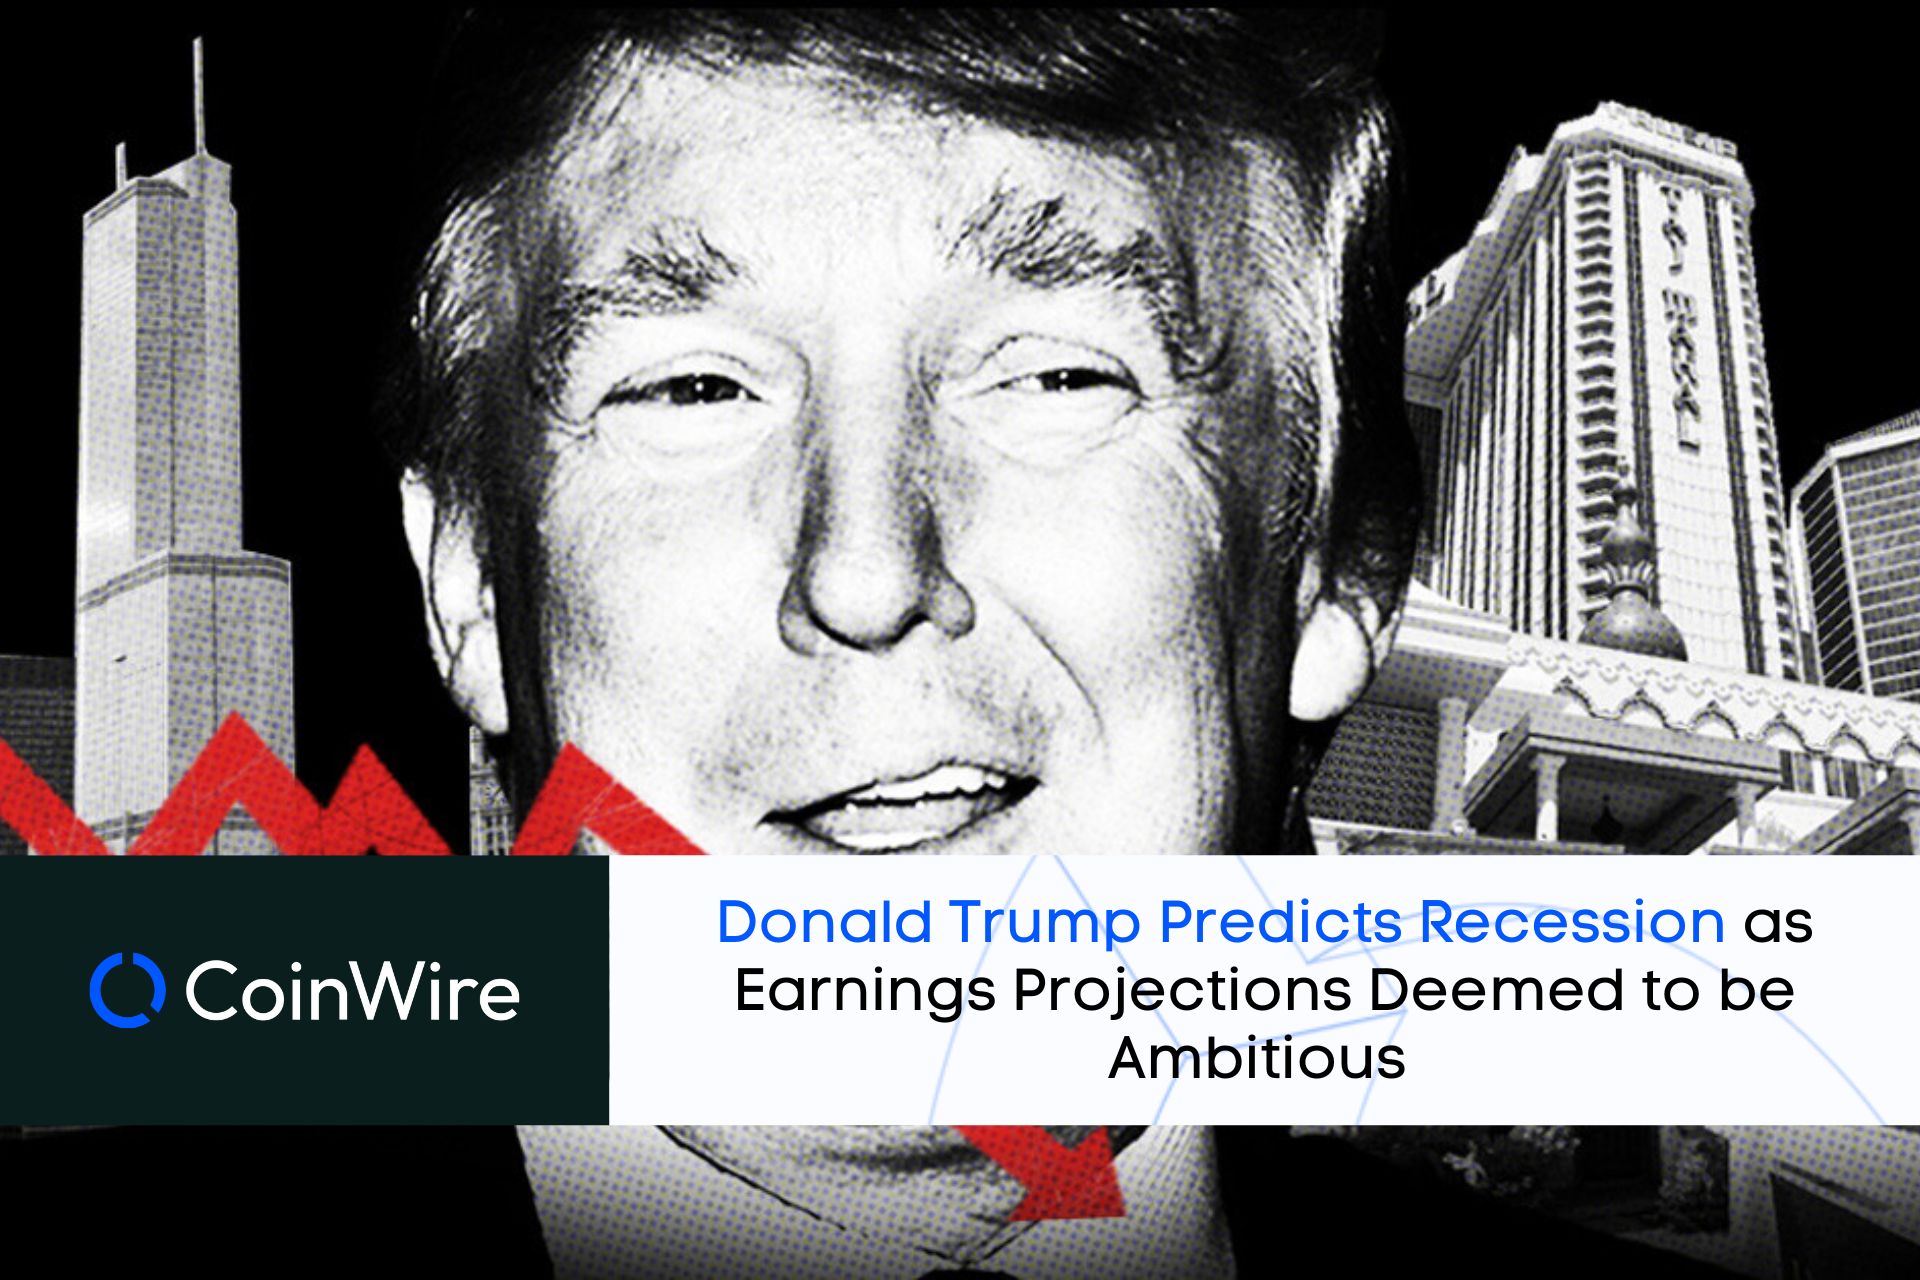 Donald Trump Predicts Recession As Us Earnings Projections Deemed To Be Ambitious